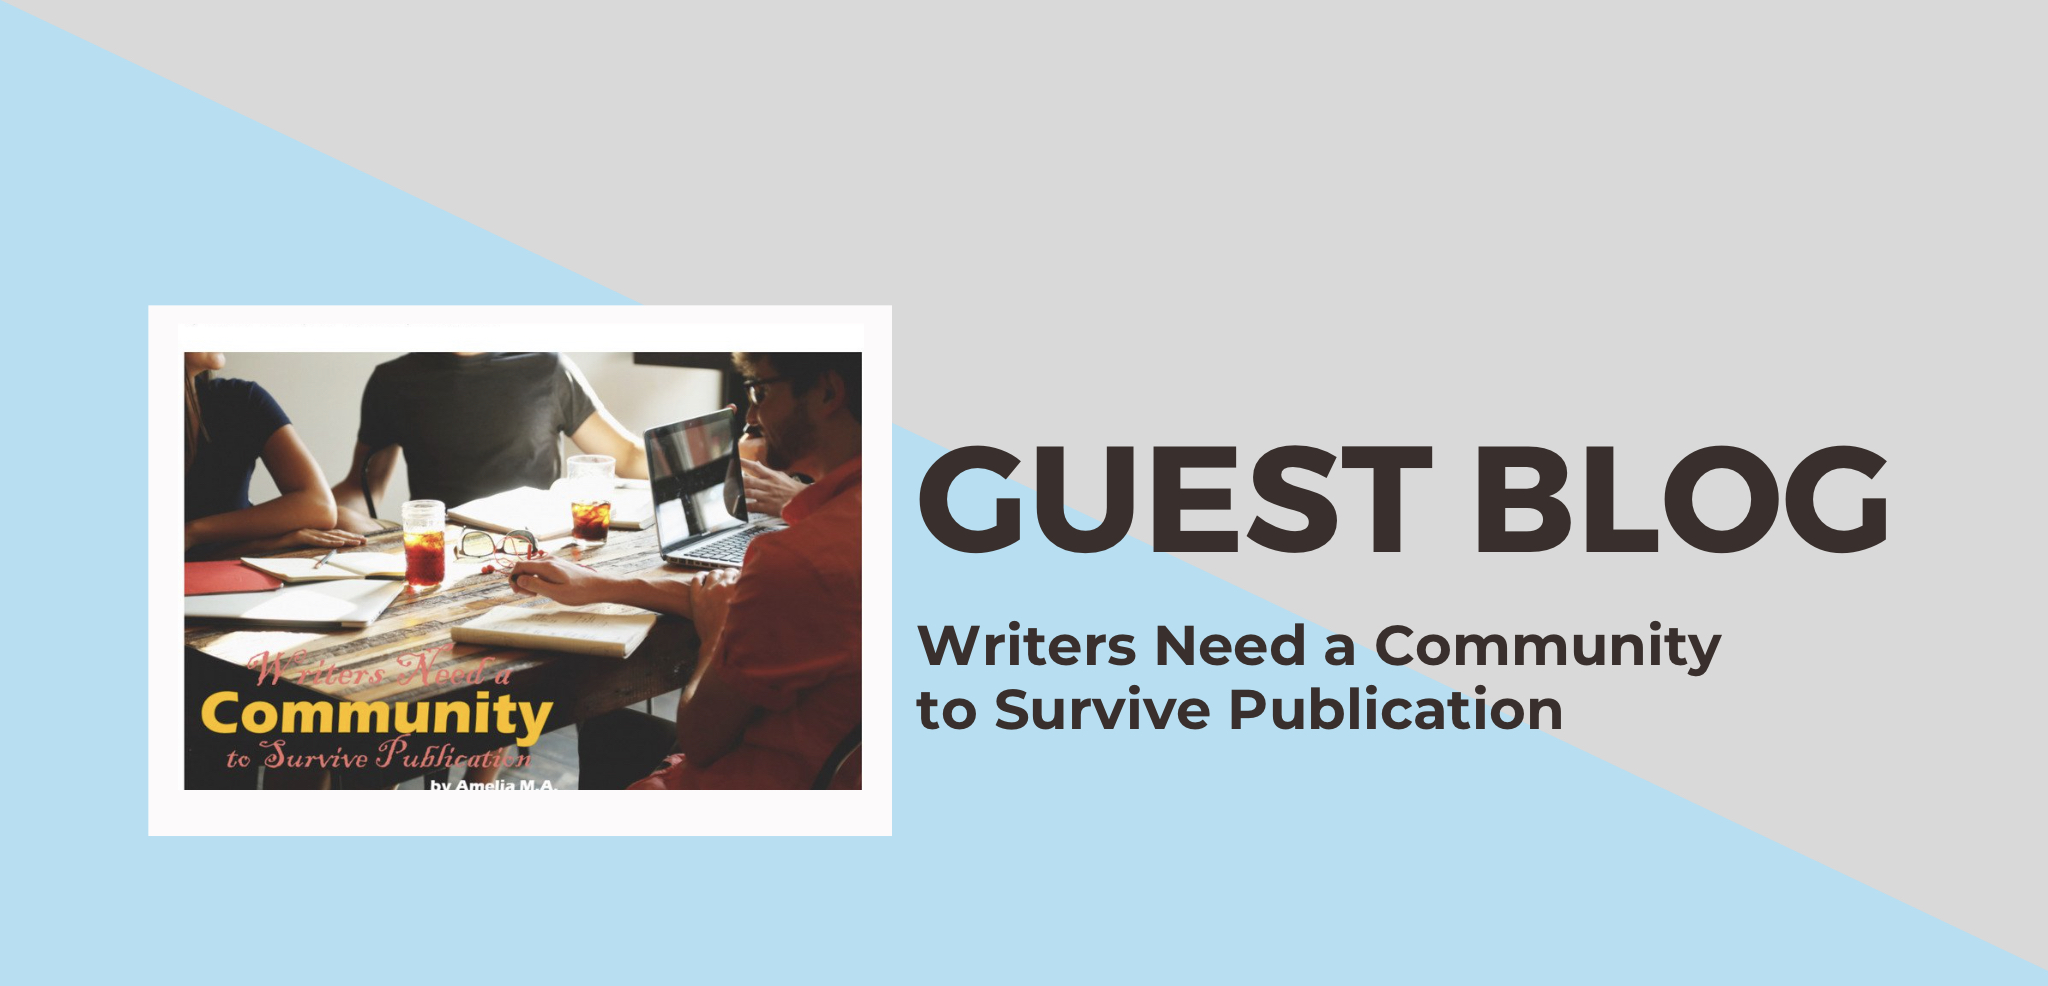 Writers Need a community to survive is a guest blog on Stoney deGeyter’s website.